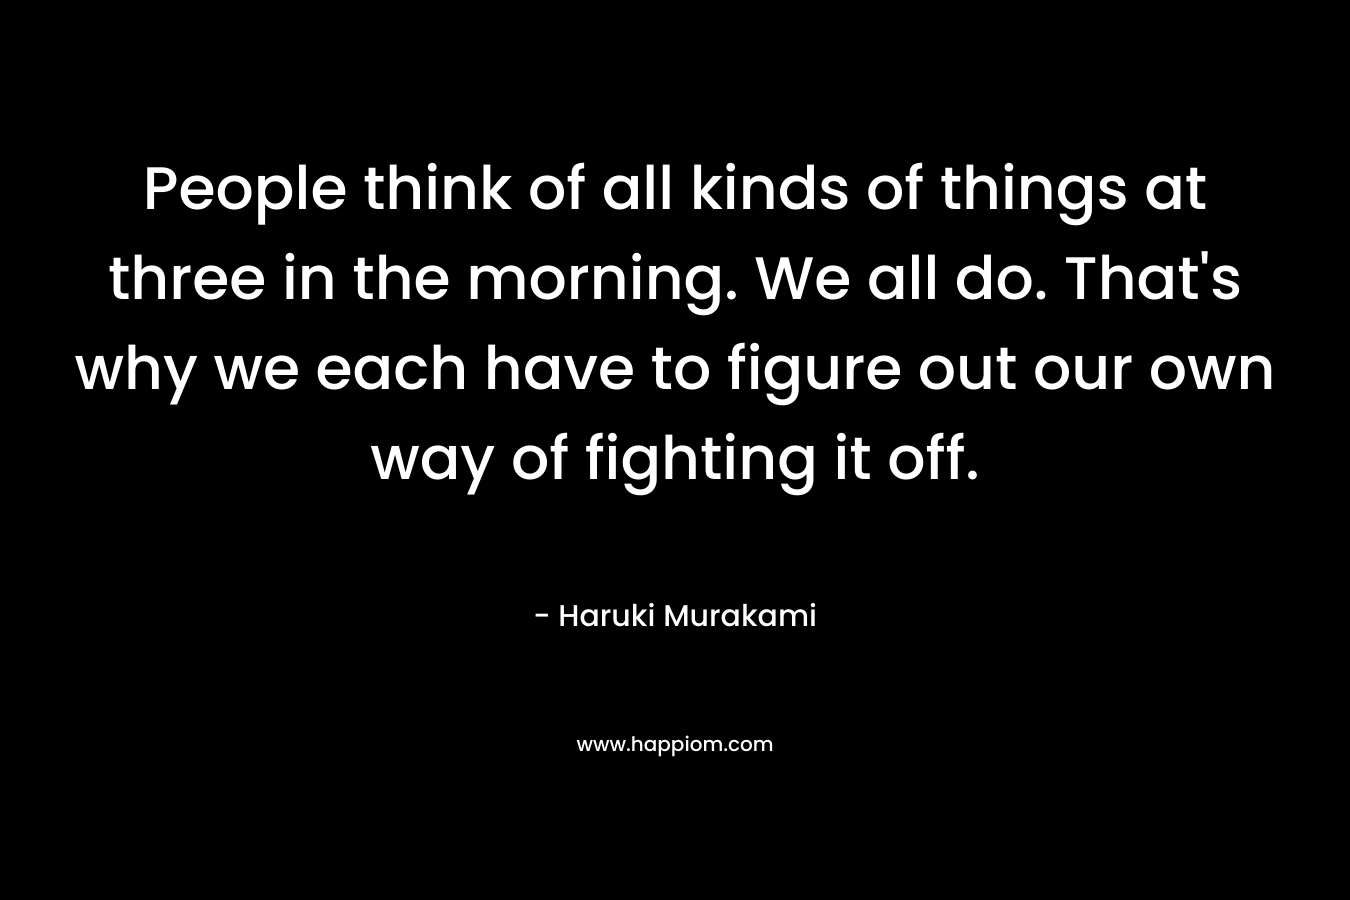 People think of all kinds of things at three in the morning. We all do. That's why we each have to figure out our own way of fighting it off.